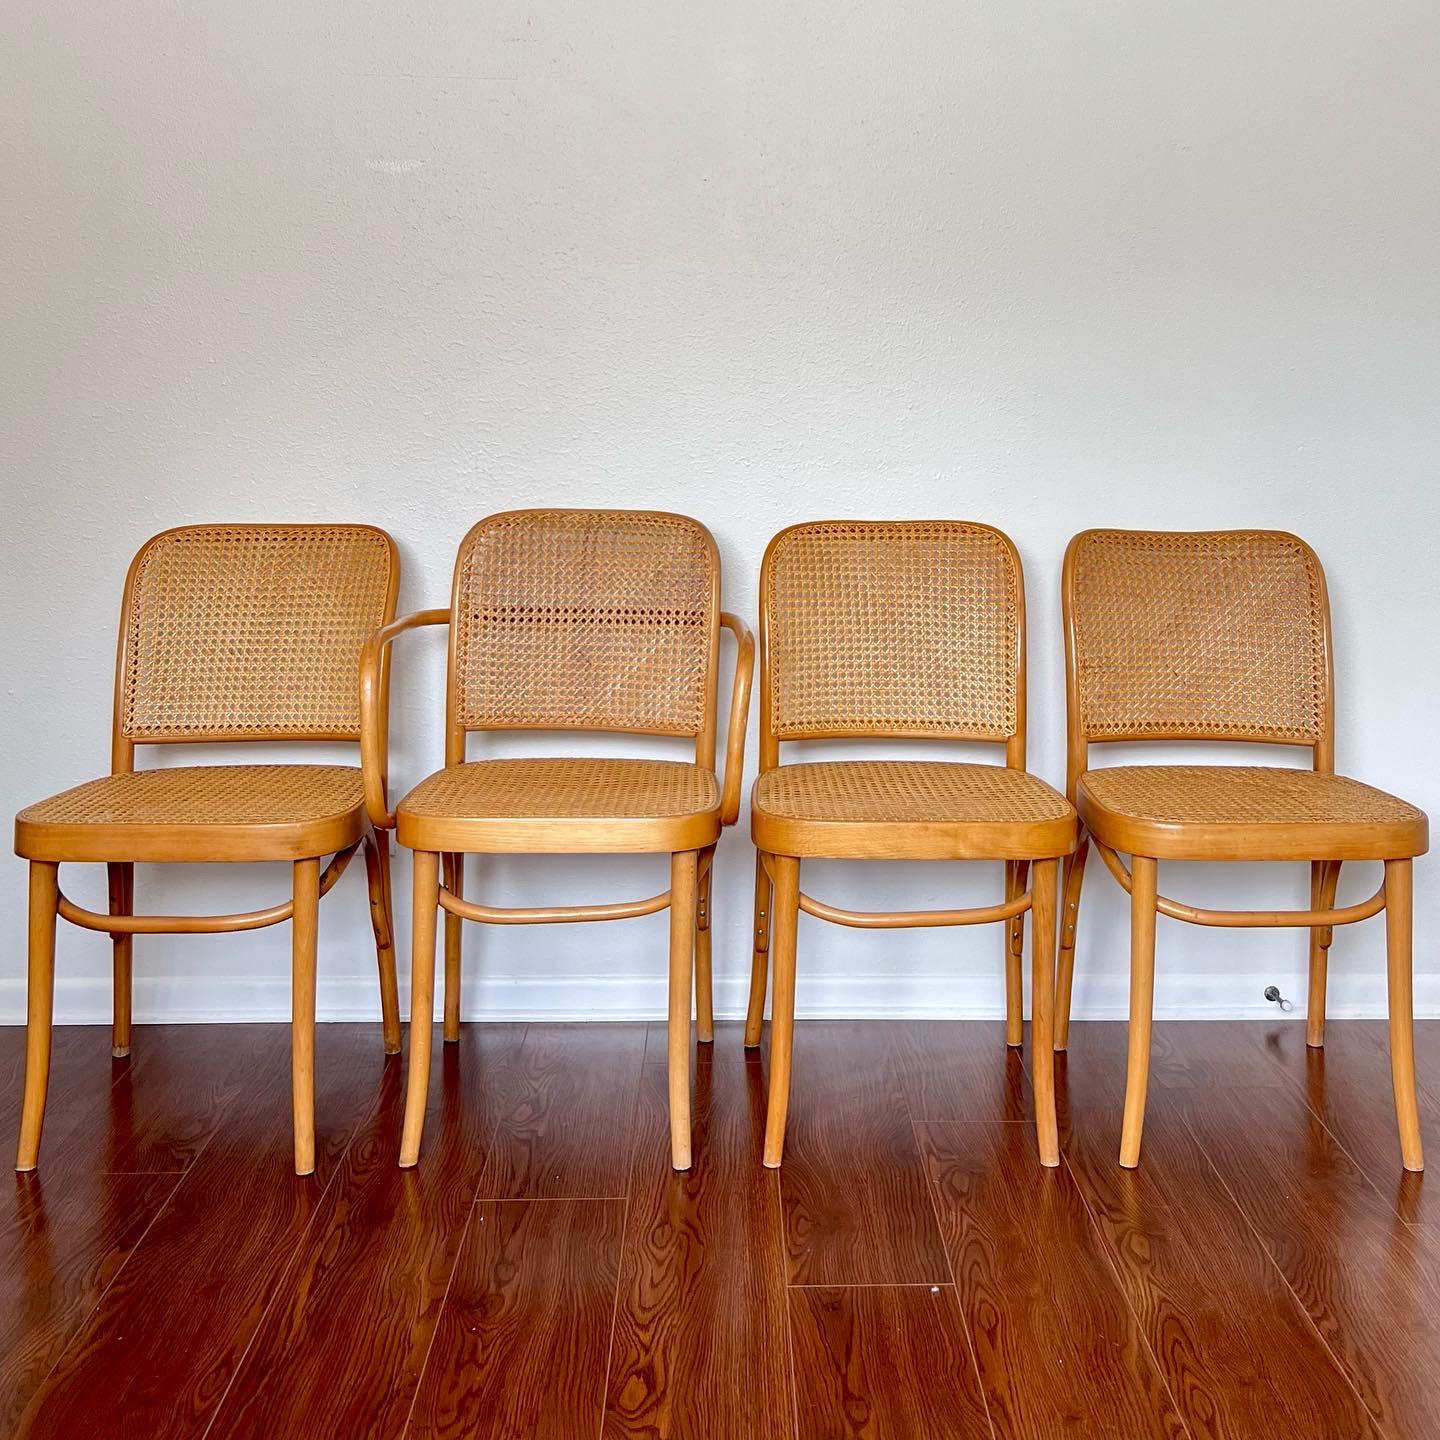 Gorgeous set of 4 Josef Hoffmann bentwood and cane chairs. Made in Poland with original FMG label. Includes 3 side chairs & 1 armchair. Very good original condition with some flaws consistent with age. Please see photos. 



Dimensions:
32